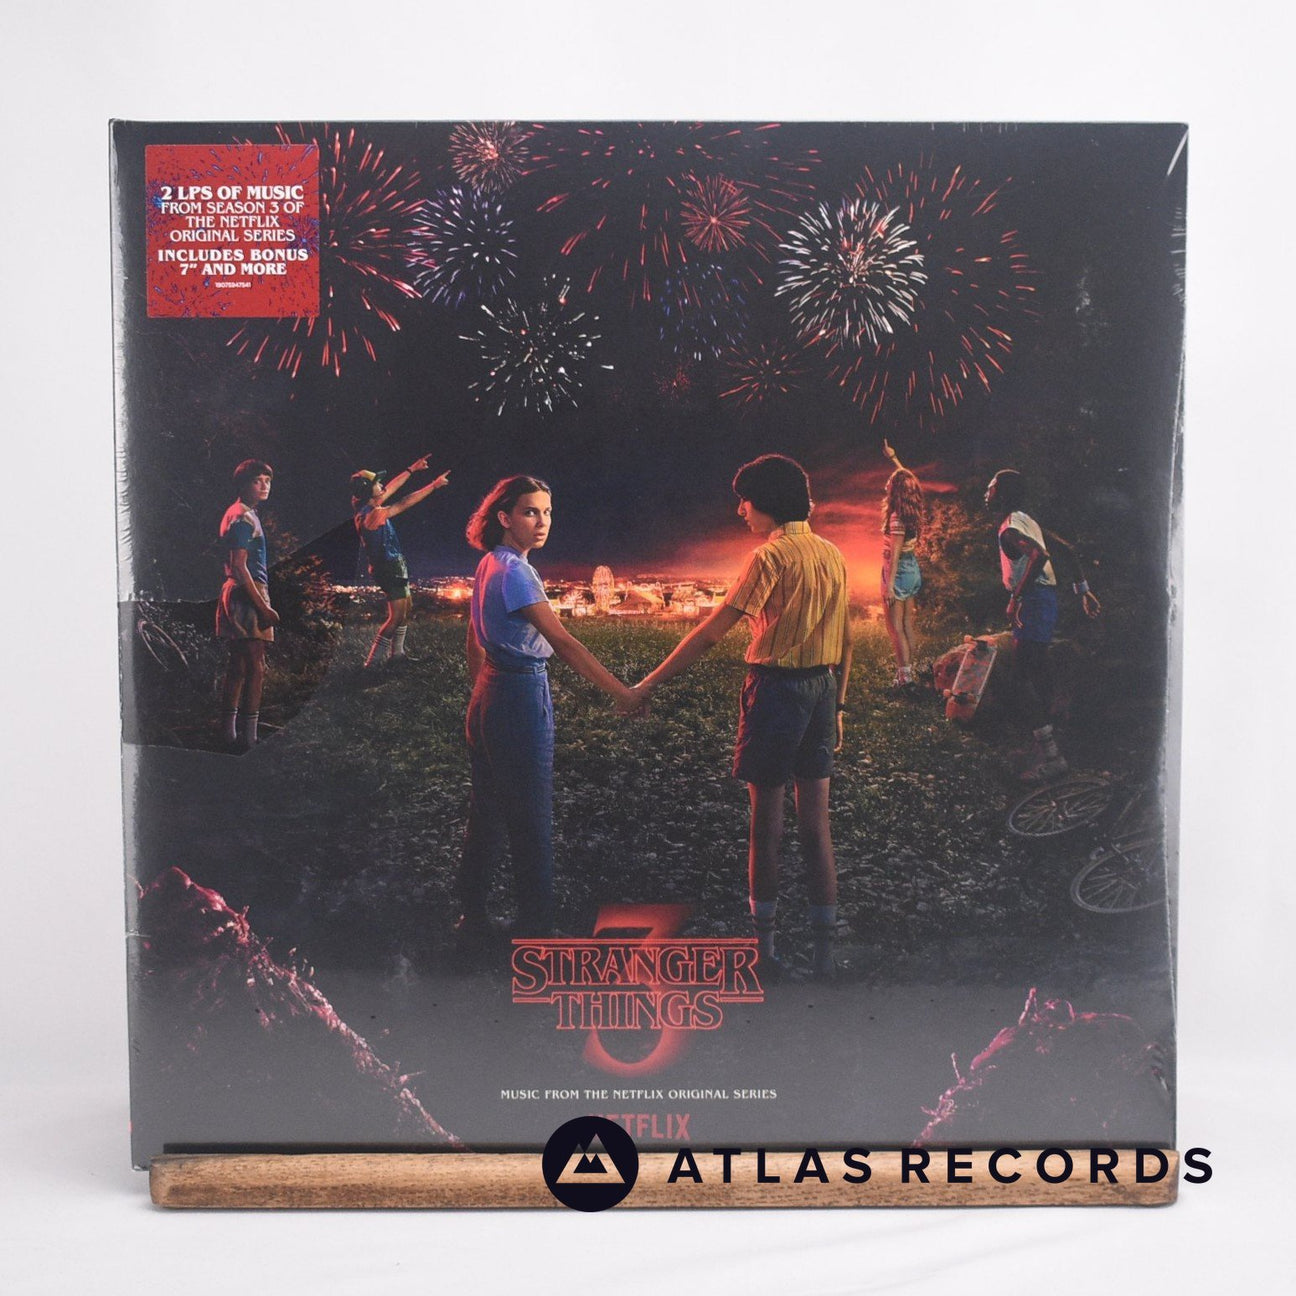 Kyle Dixon Stranger Things 3 Music From The Netflix Original Series Double LP + 7" Vinyl Record - Front Cover & Record